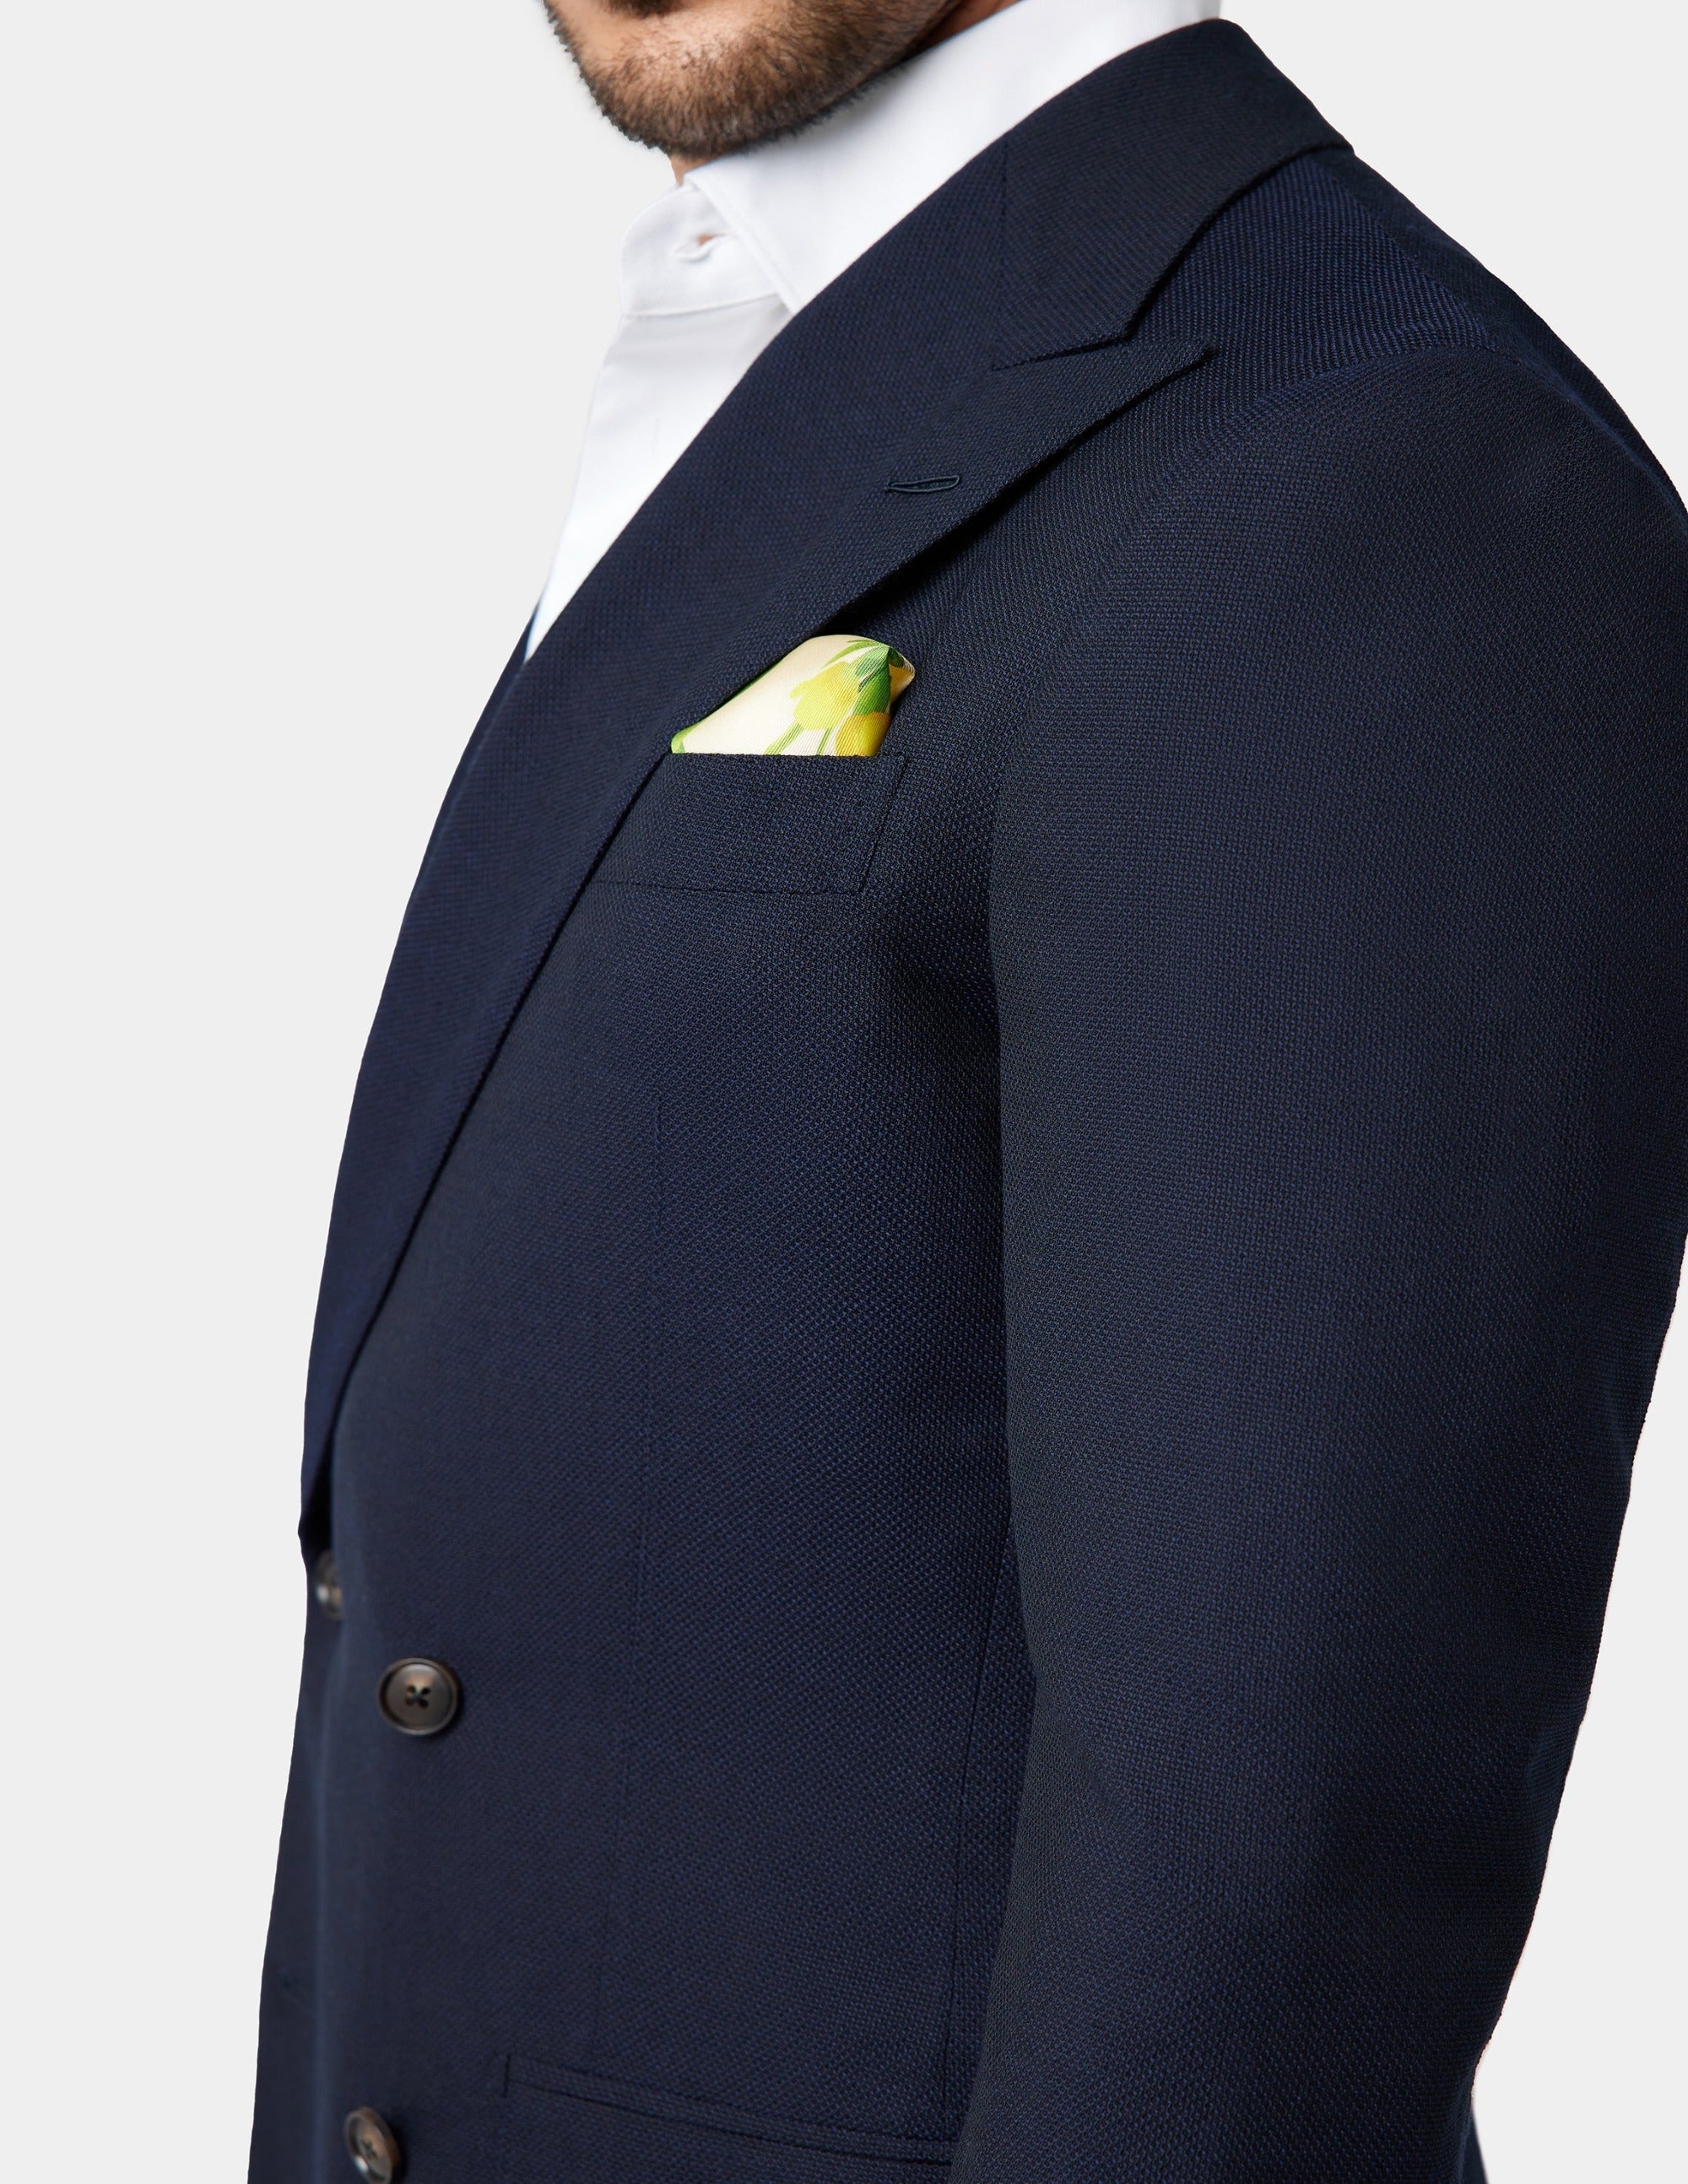 Navy Blue Double Breasted Suit - Samir Bachkami